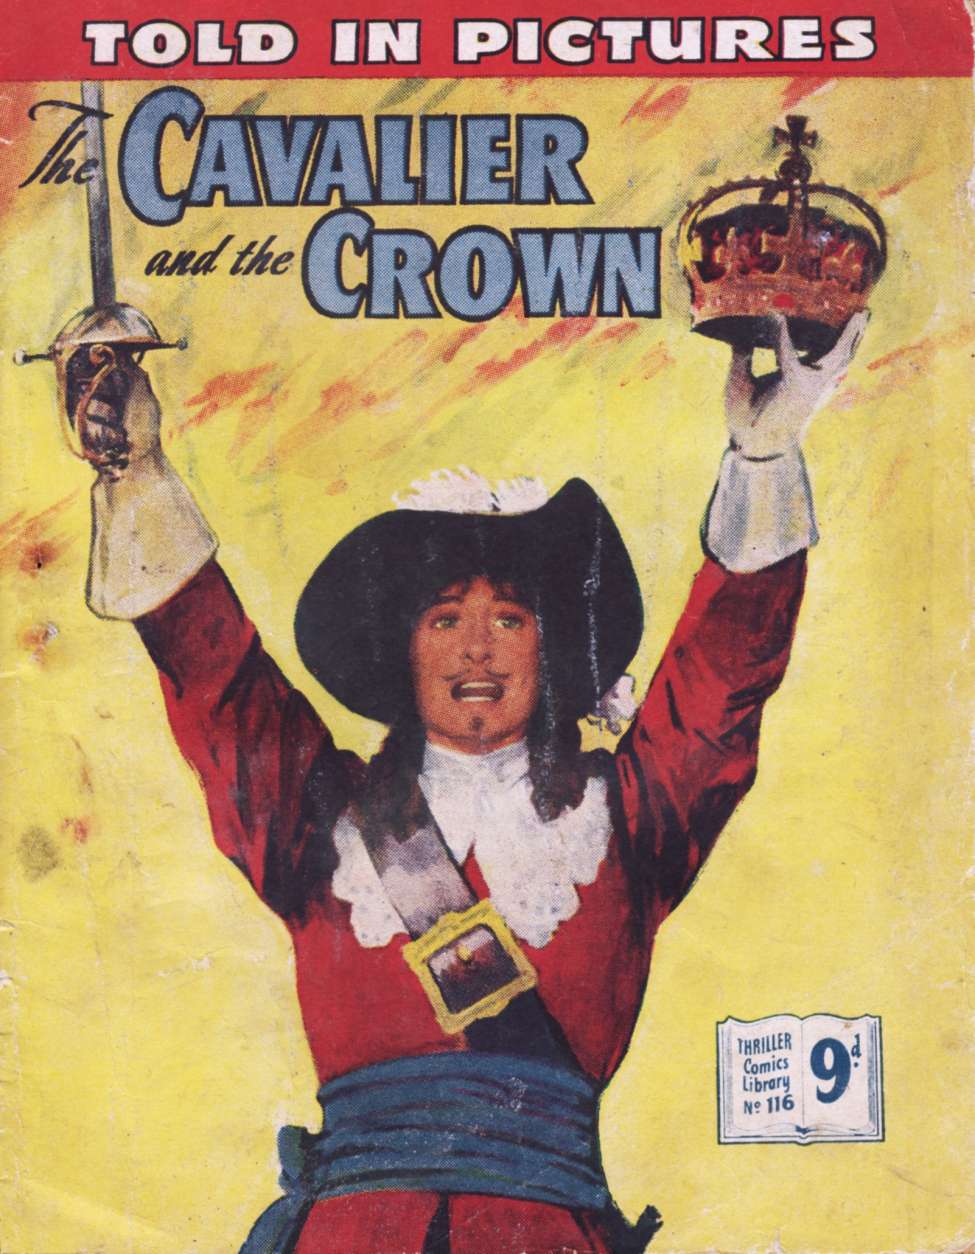 Book Cover For Thriller Comics Library 116 - The Cavalier and the Crown